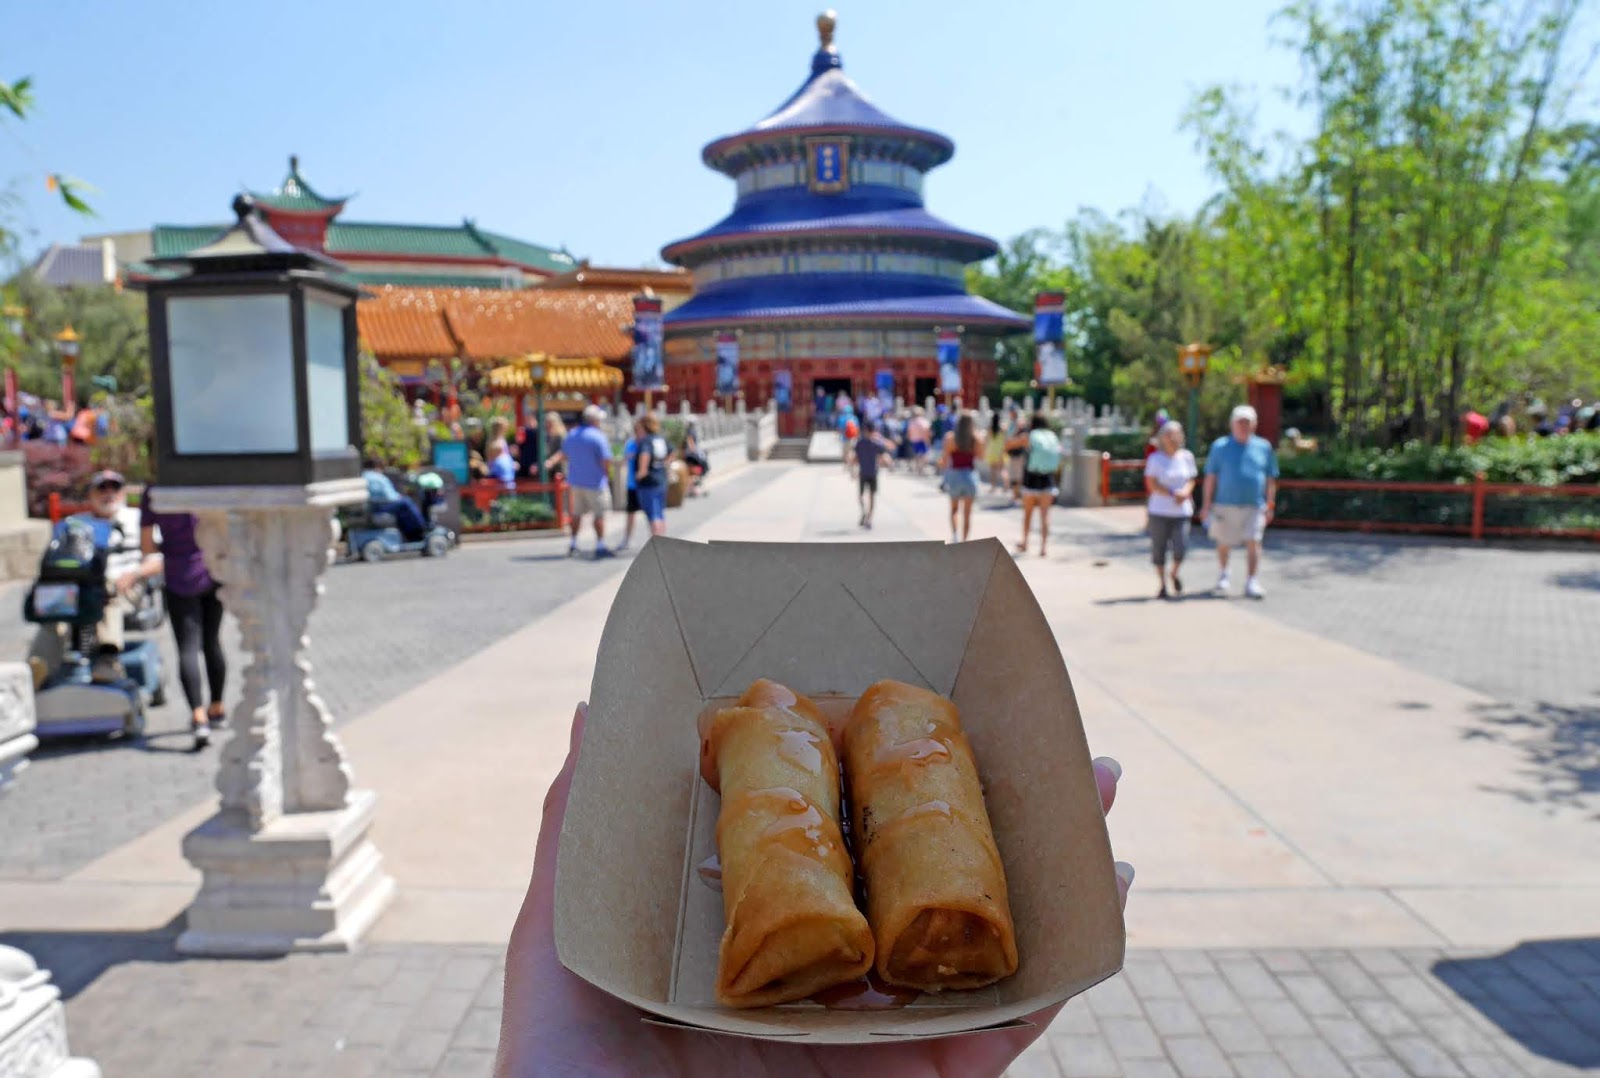 Spring rolls in the China Pavillion, Epcot International Flower and Garden Festival